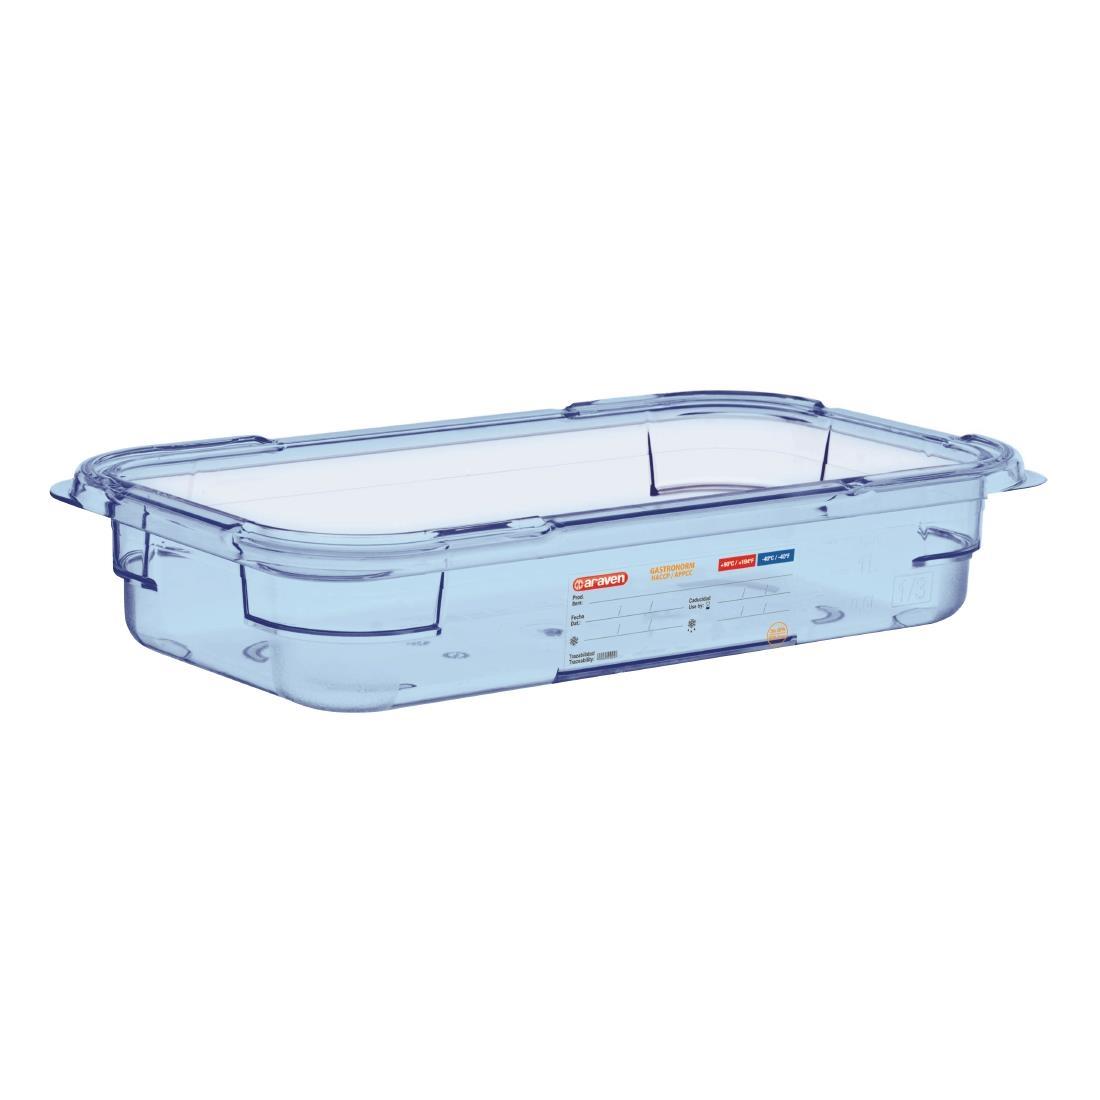 Araven ABS Food Storage Container Blue GN 1/3 65mm - GP578  - 1